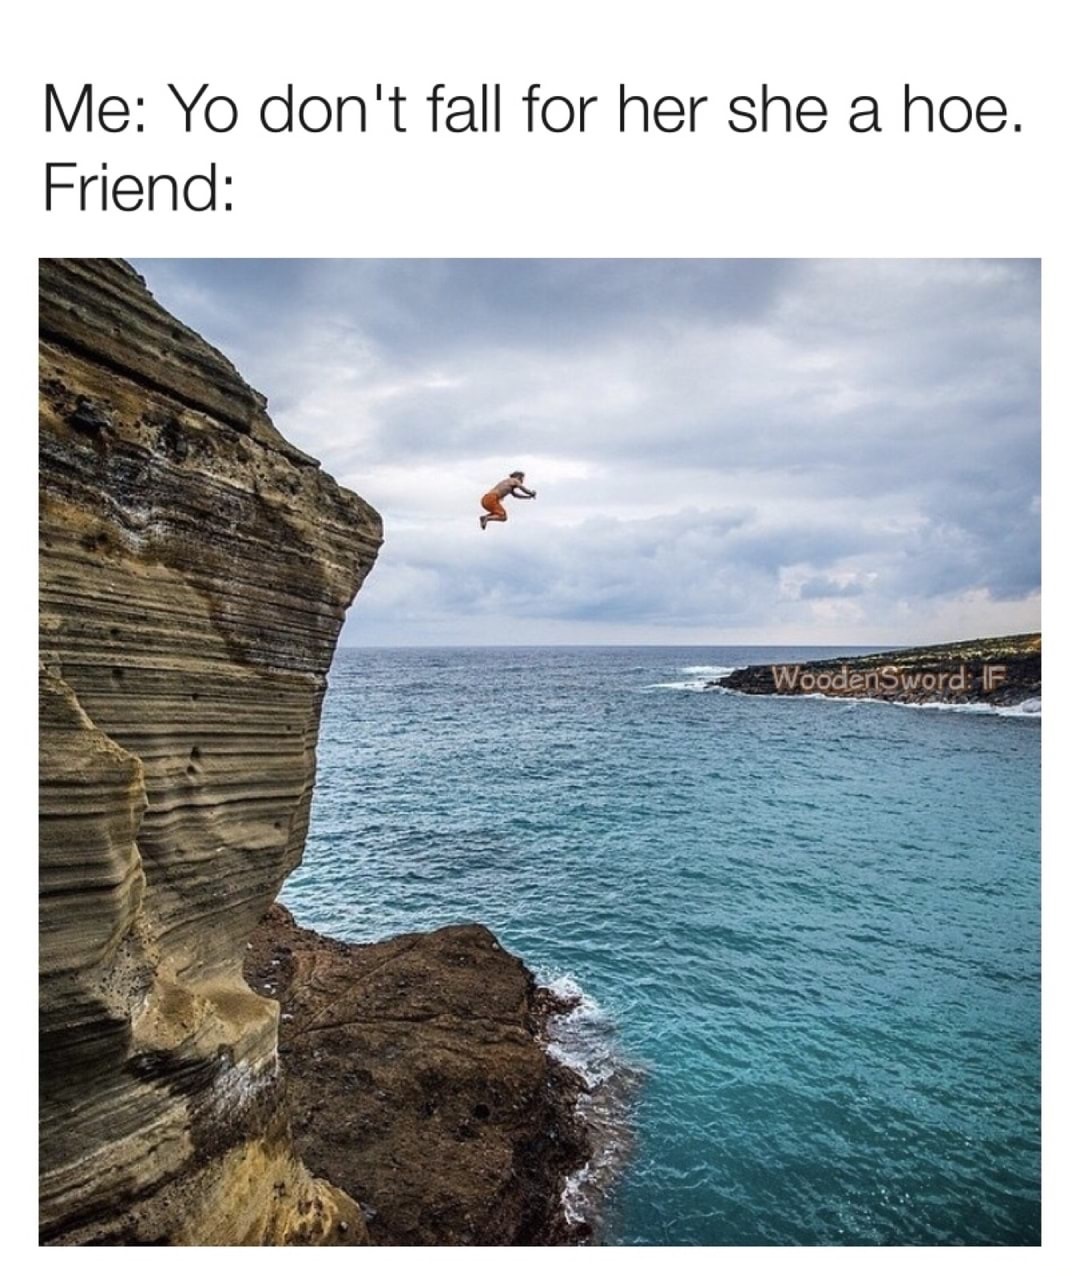 Man falling off a cliff like he fell for that hoe everyone warned him about.